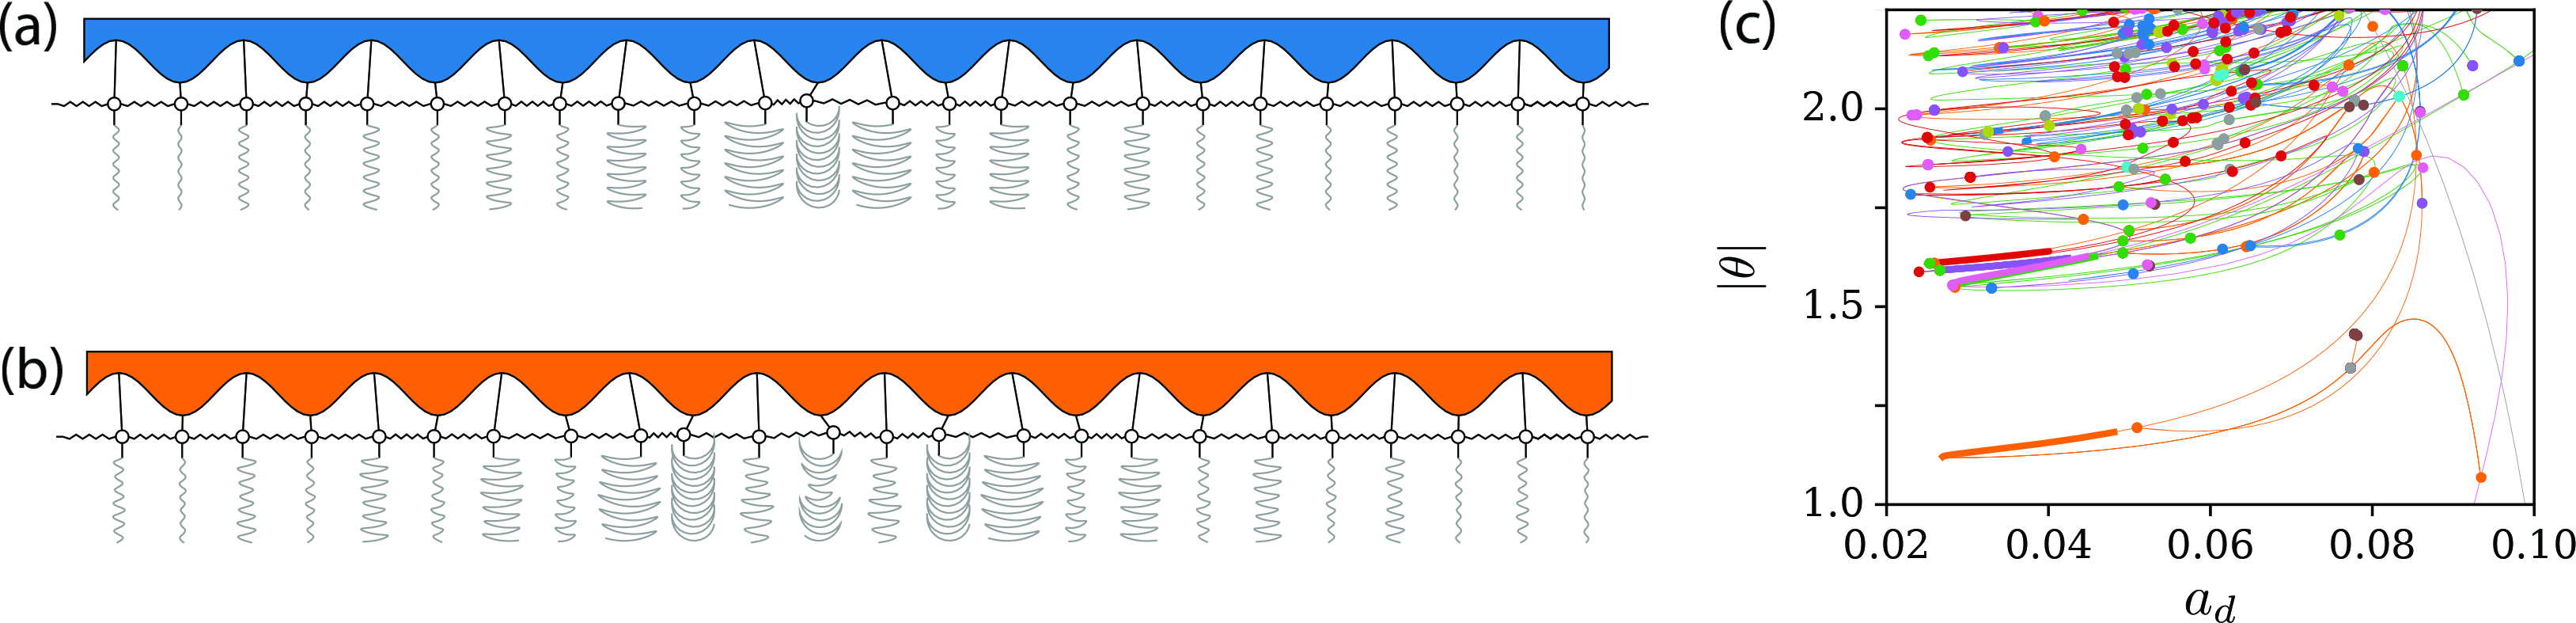 &lt;strong&gt;Figure 1.&lt;/strong&gt; Driven array of pendulums with an alternating offset length of \(\Delta=0.5\). &lt;strong&gt;1a.&lt;/strong&gt; For a sufficiently small driving amplitude \(a_d\)—which depends on driving frequency \(\omega_d\)—the system relaxes to a steady state in which the pendulums do not swing. The seismometer-style plots indicate time traces of the pendulum bobs’ Cartesian coordinates. &lt;strong&gt;1b–1c.&lt;/strong&gt; As the control parameter \(a_d\) increases, the steady state can bifurcate to either a periodic solution with a subharmonic response (as in &lt;strong&gt;1b&lt;/strong&gt;) or a quasiperiodic solution with an anharmonic response (as in &lt;strong&gt;1c&lt;/strong&gt;), depending on \(\omega_d\). The insets depict the corresponding orbits. Figure courtesy of Zachary Nicolaou.